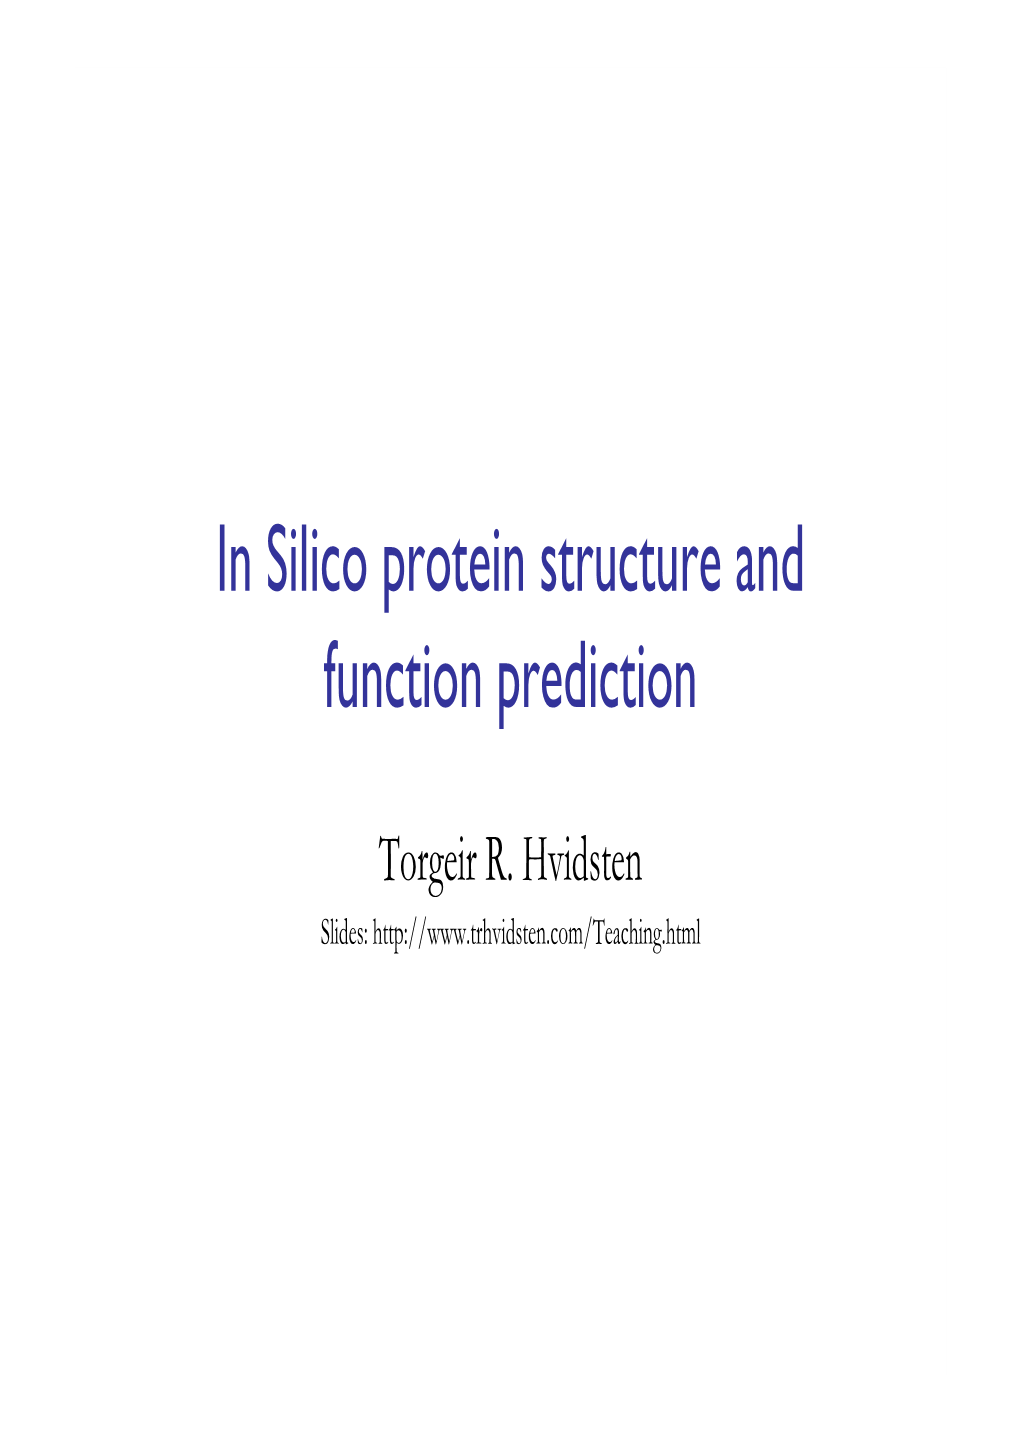 In Silico Protein Structure and Function Prediction